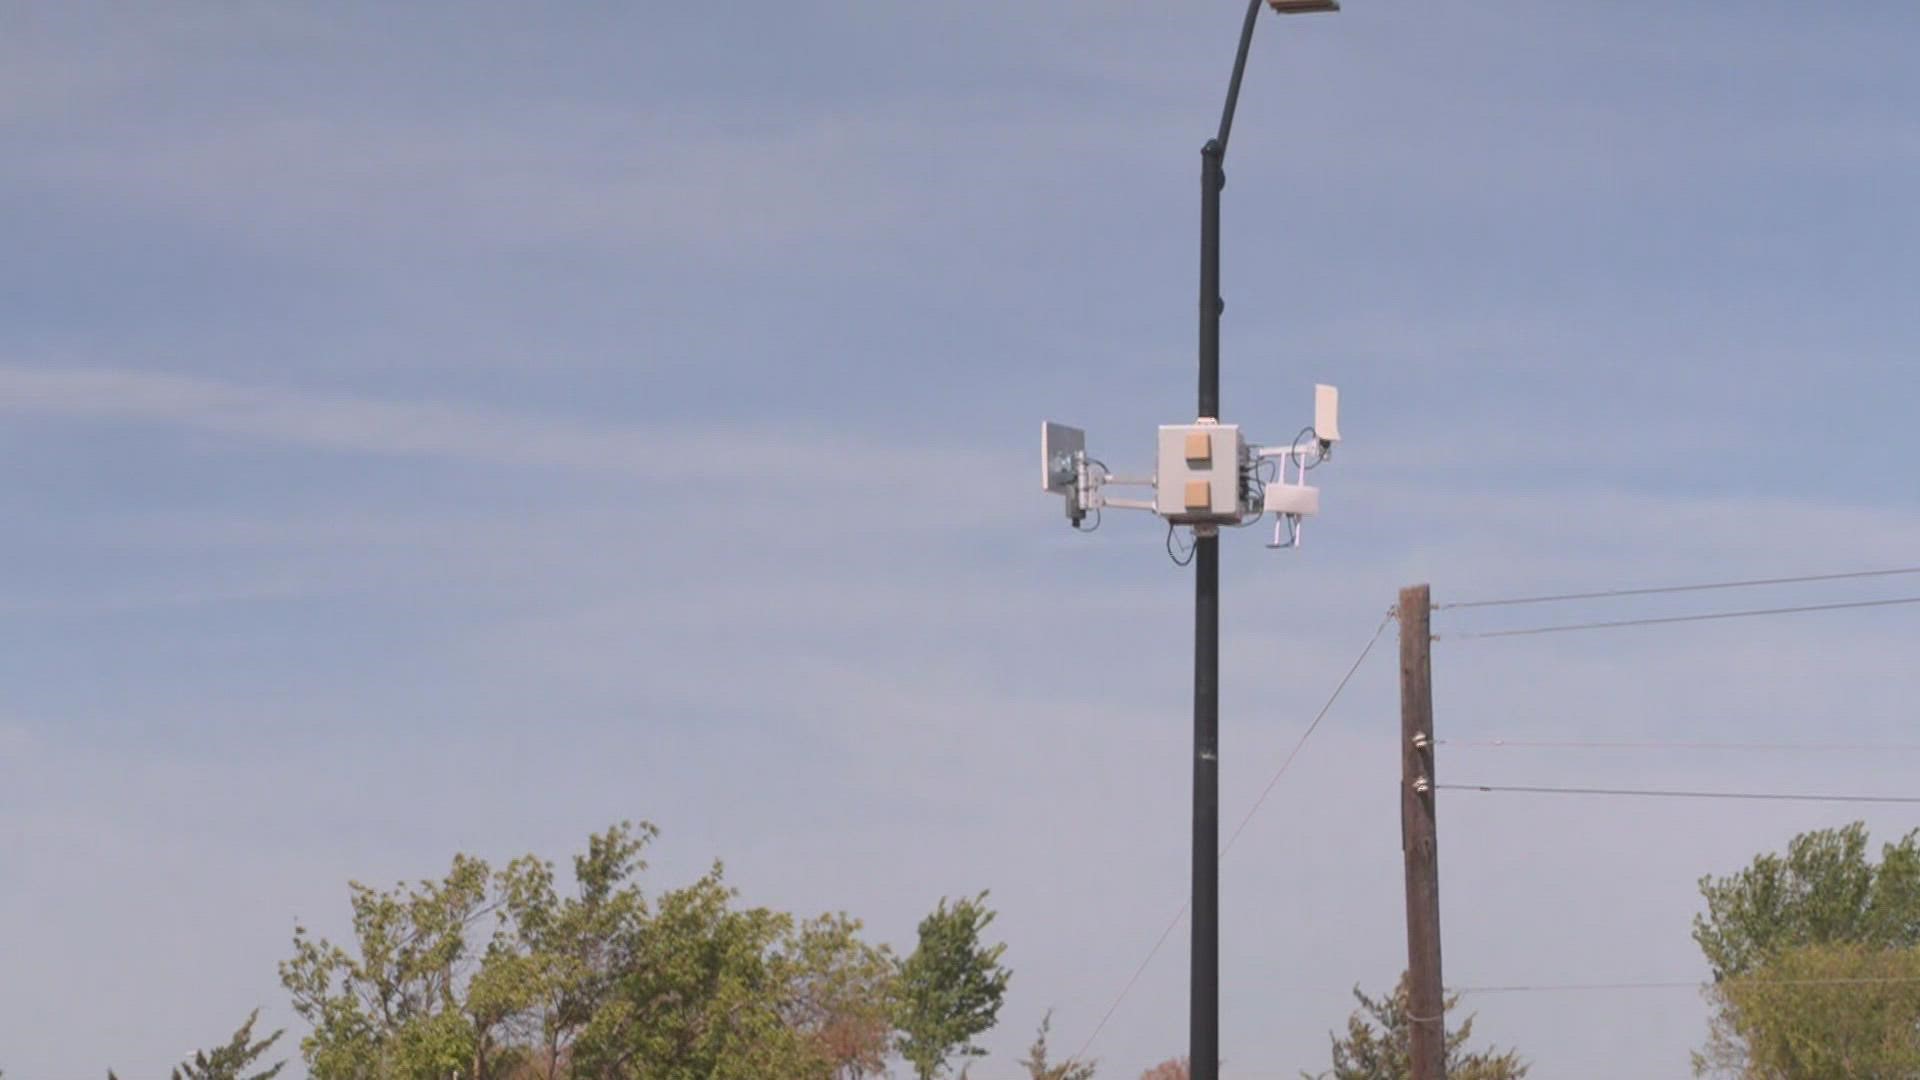 Fort Worth teamed up with Cisco to bring free high-speed wifi to some neighborhoods.